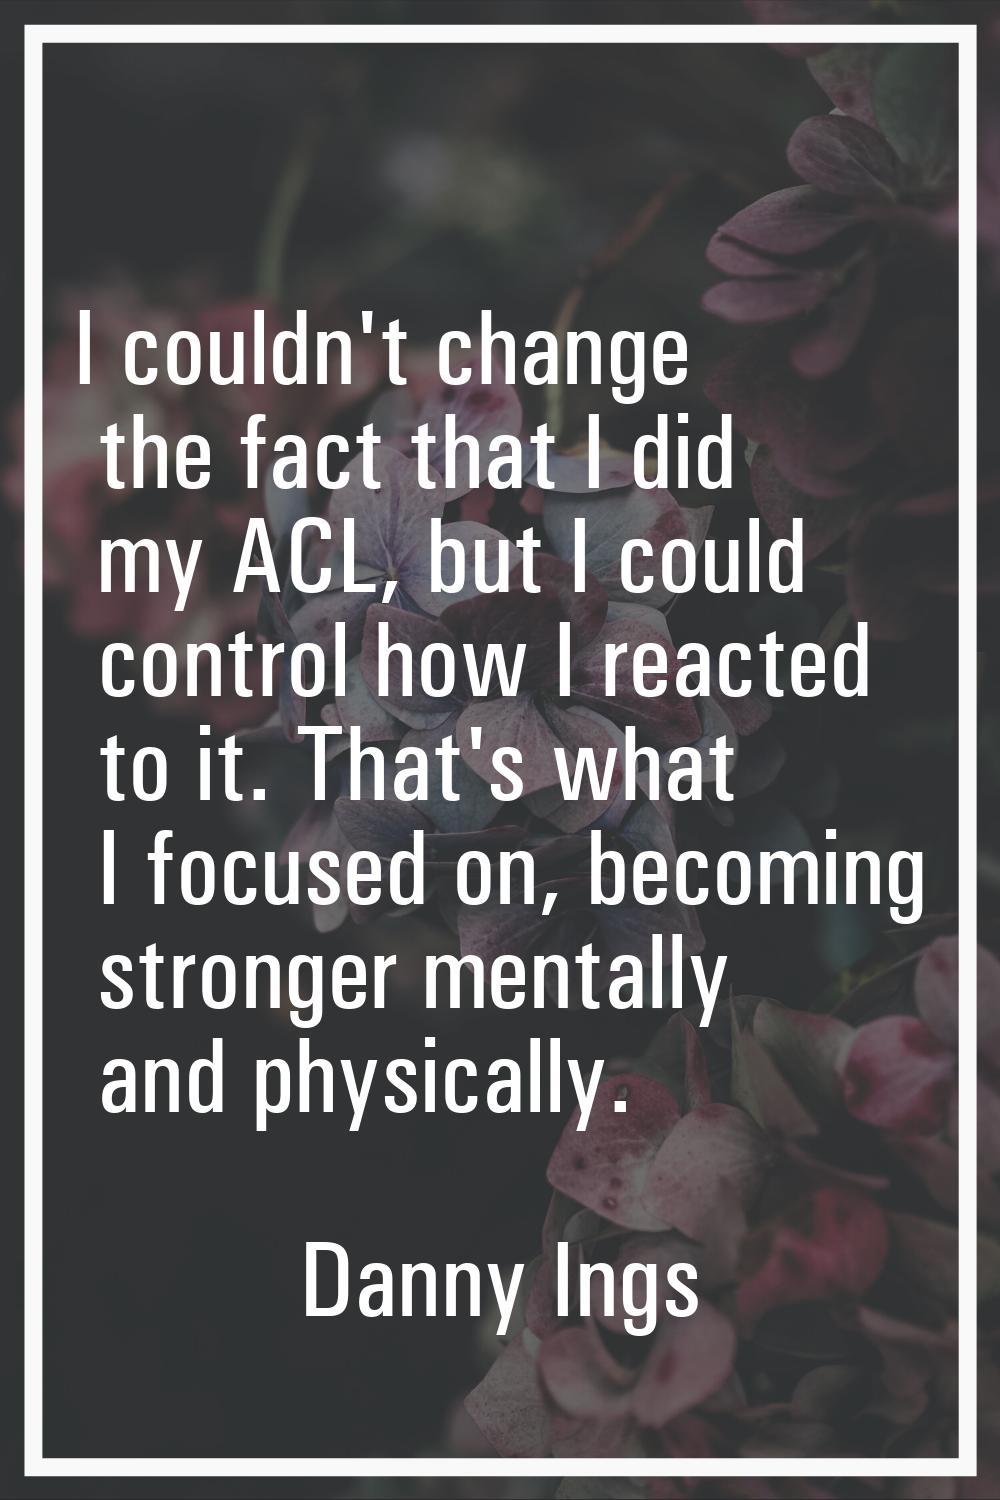 I couldn't change the fact that I did my ACL, but I could control how I reacted to it. That's what 